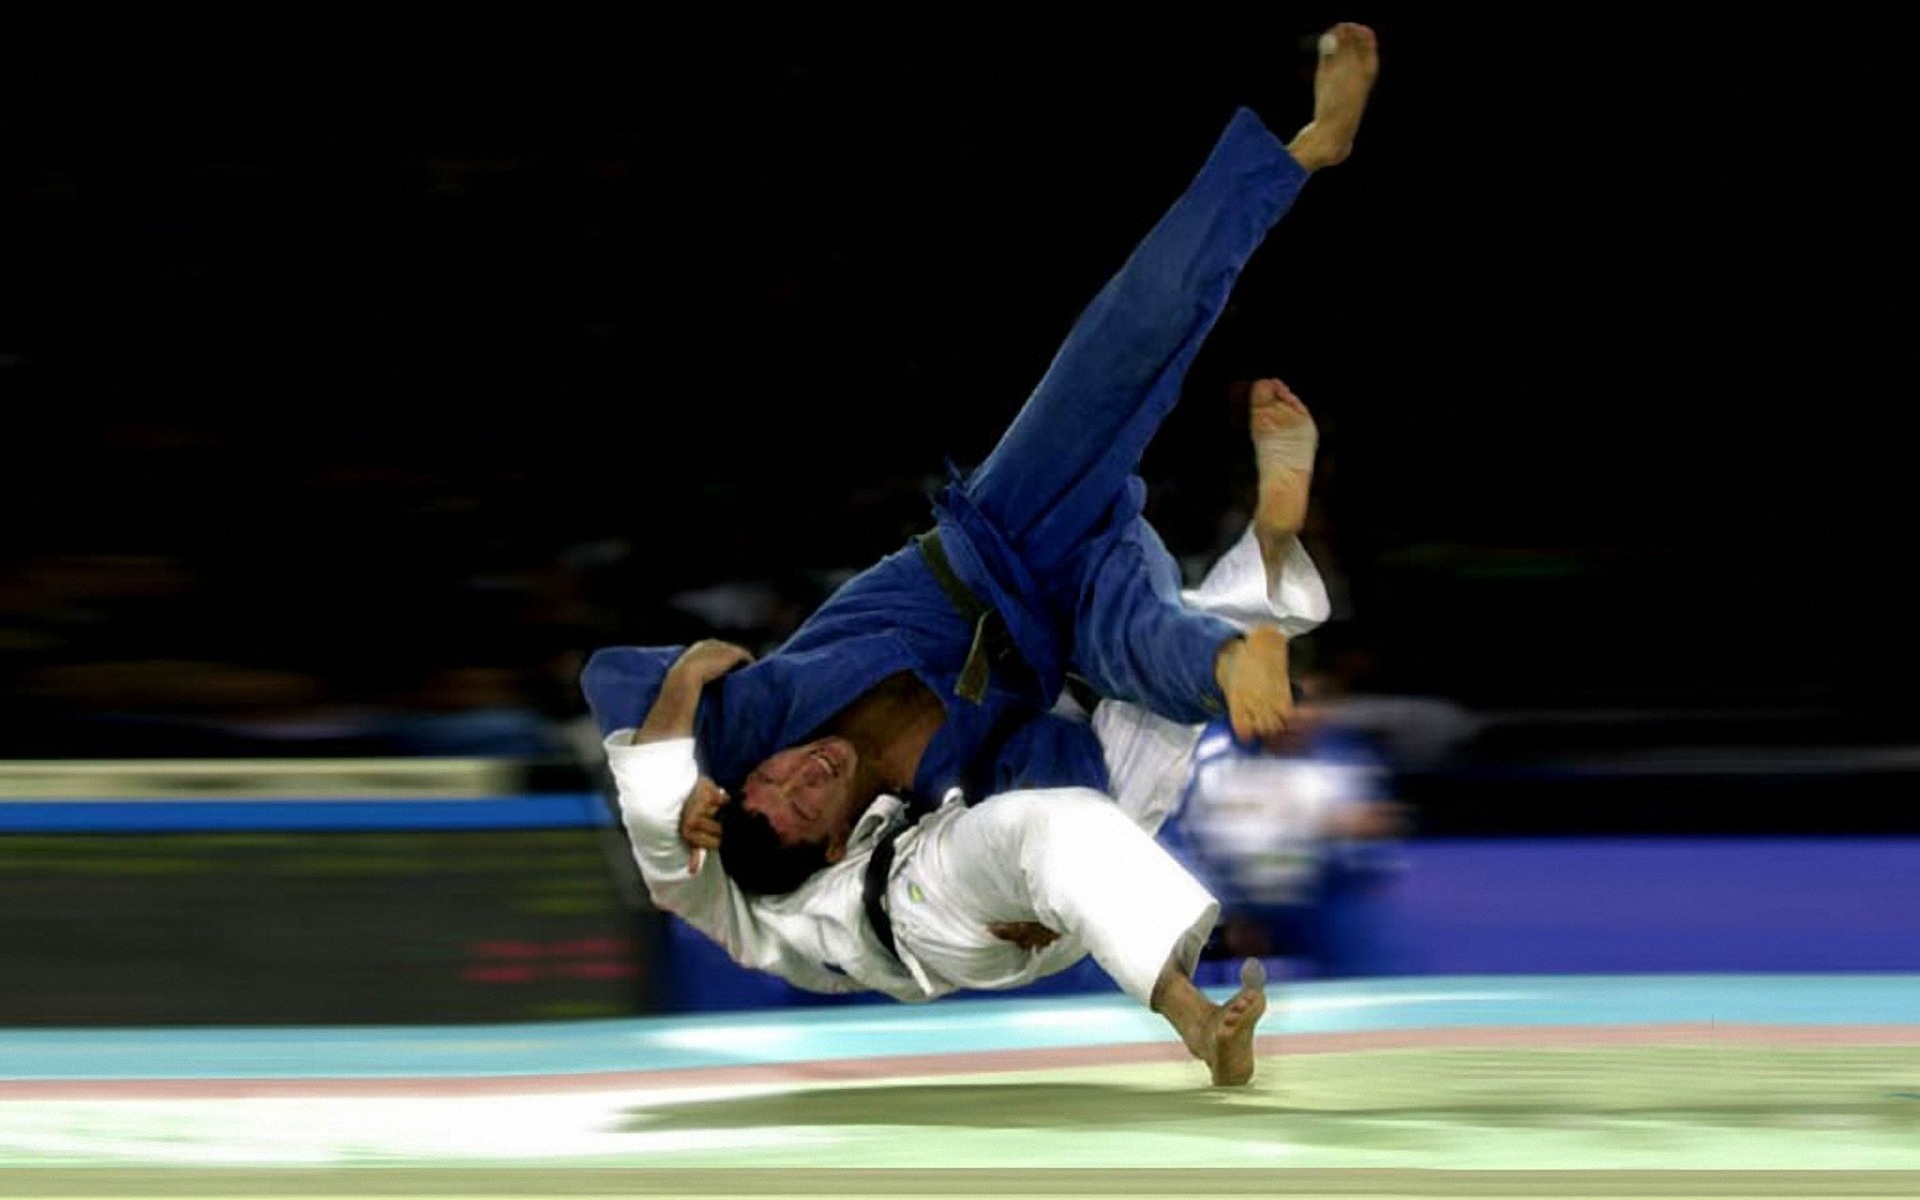 Judo Moment Wallpaper Pictures